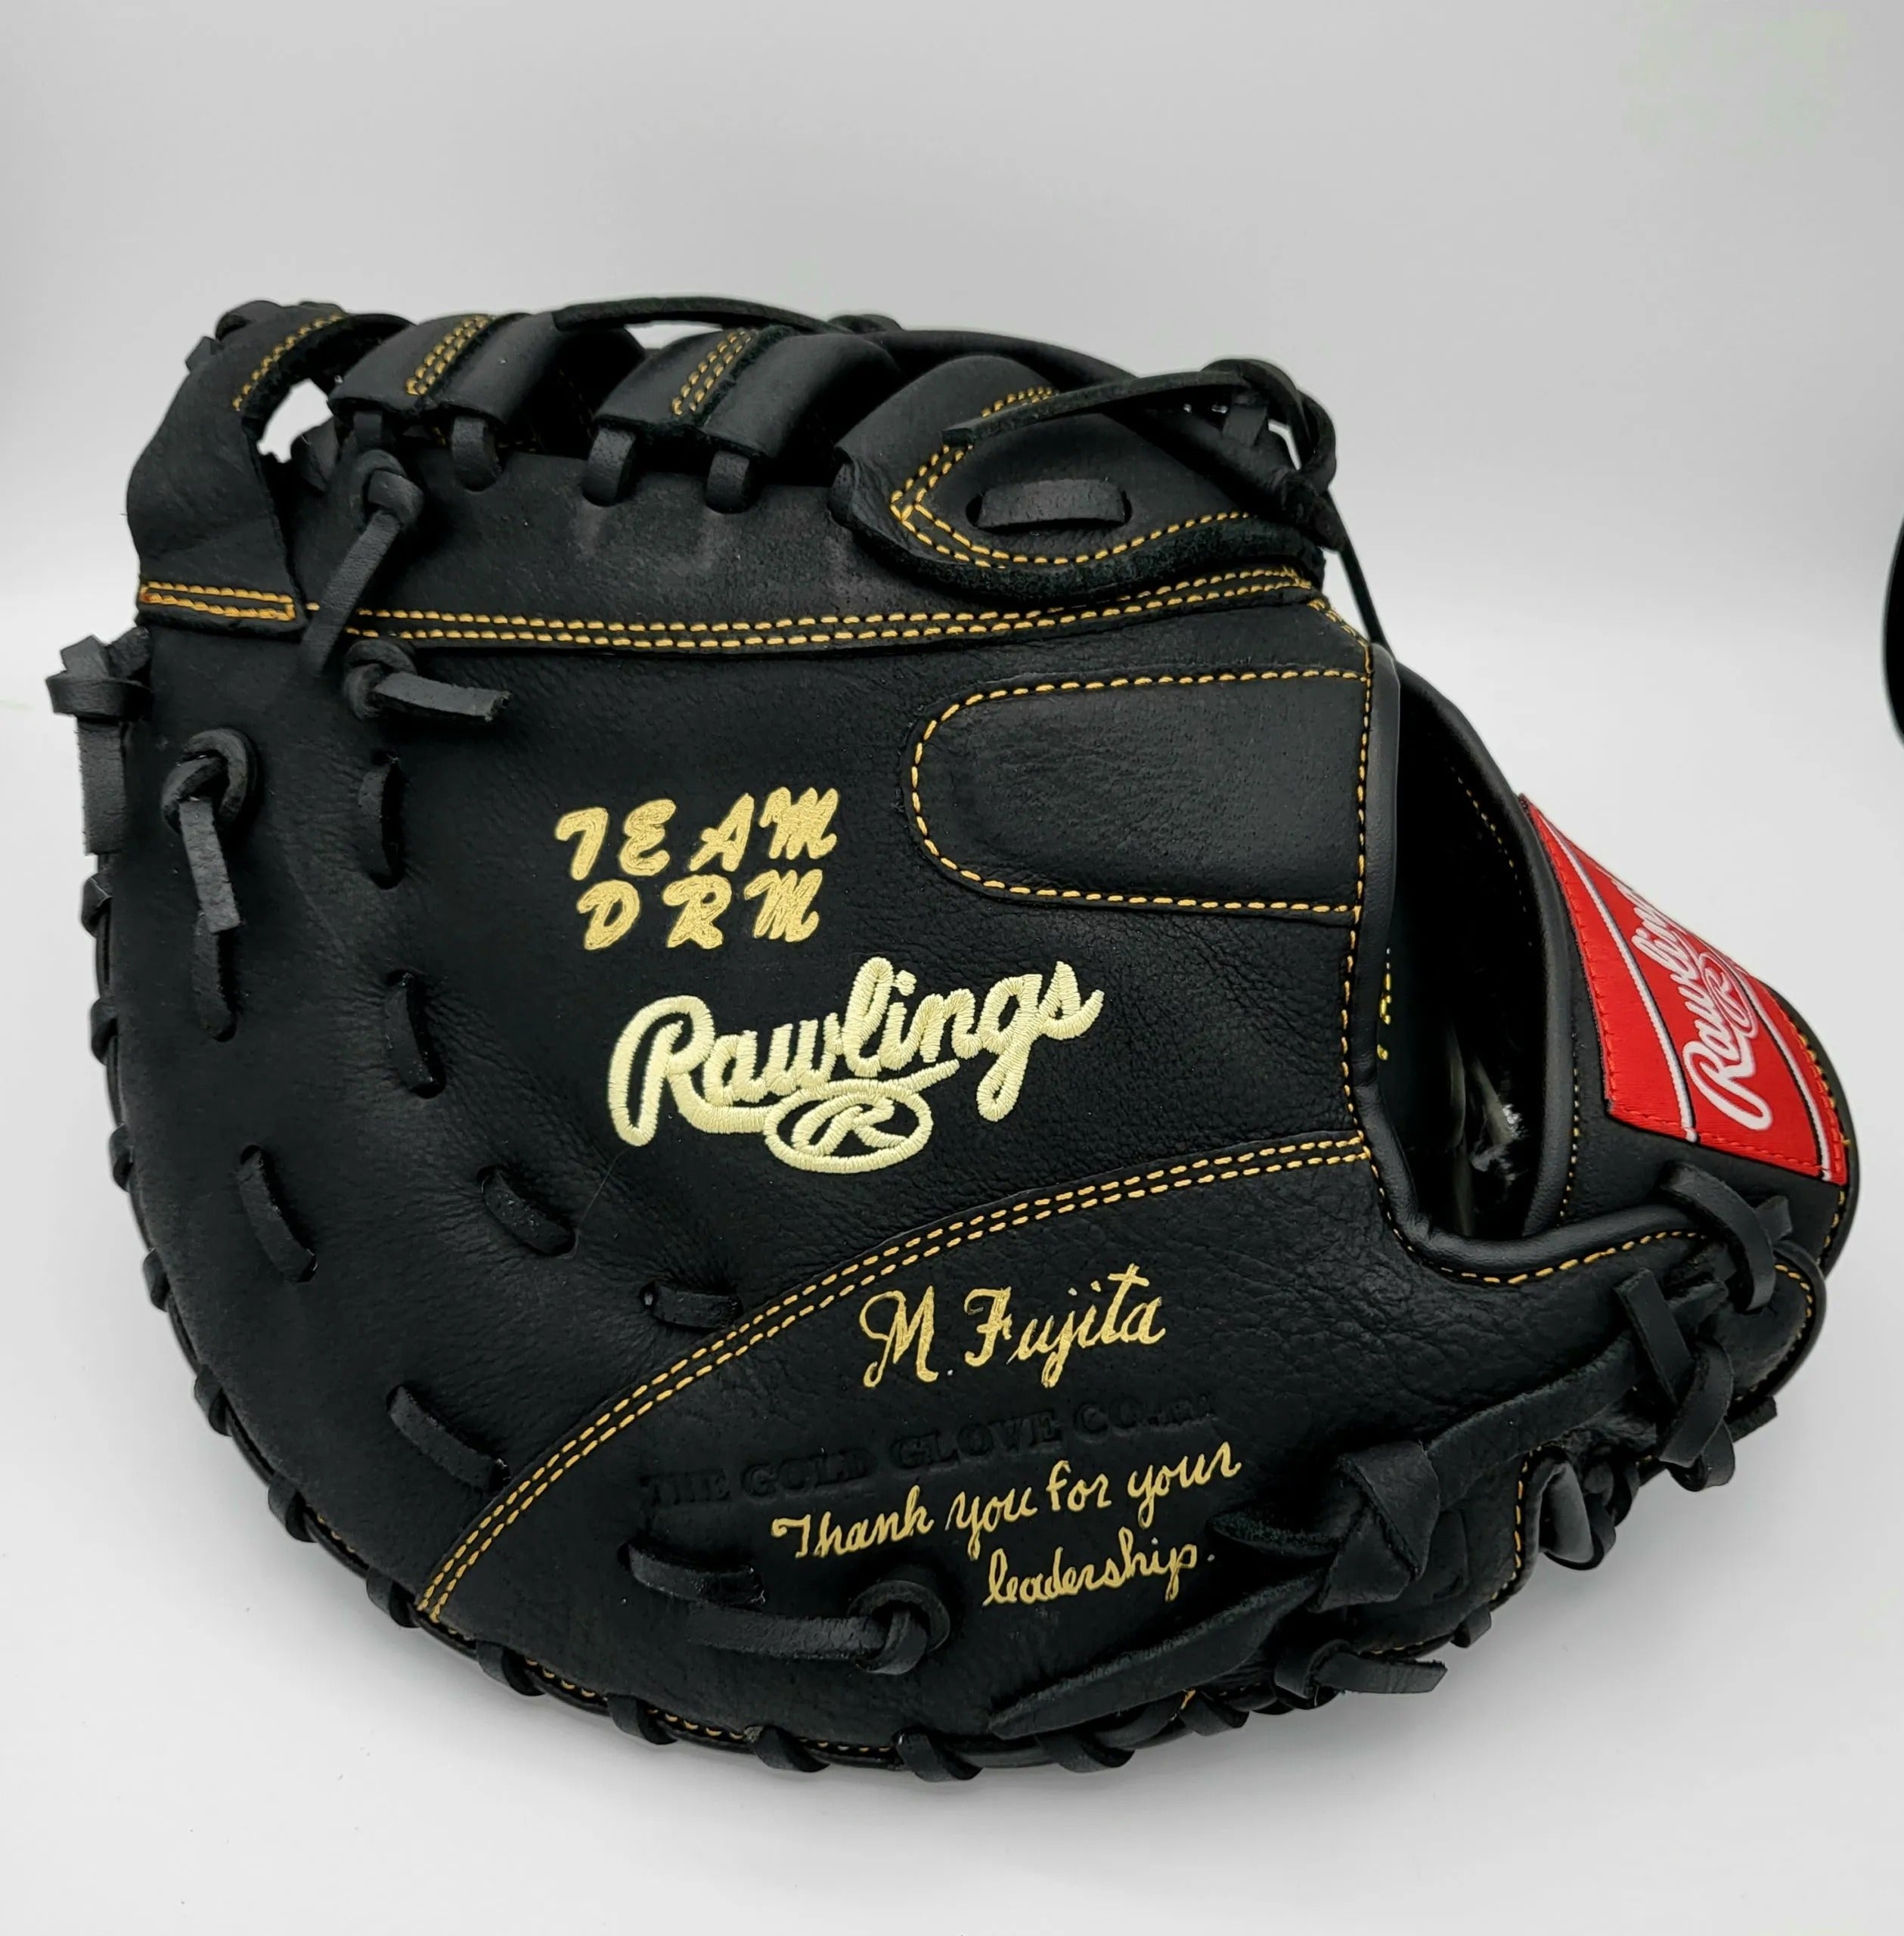 Catch every game's highlights with your own personalized leather baseball glove